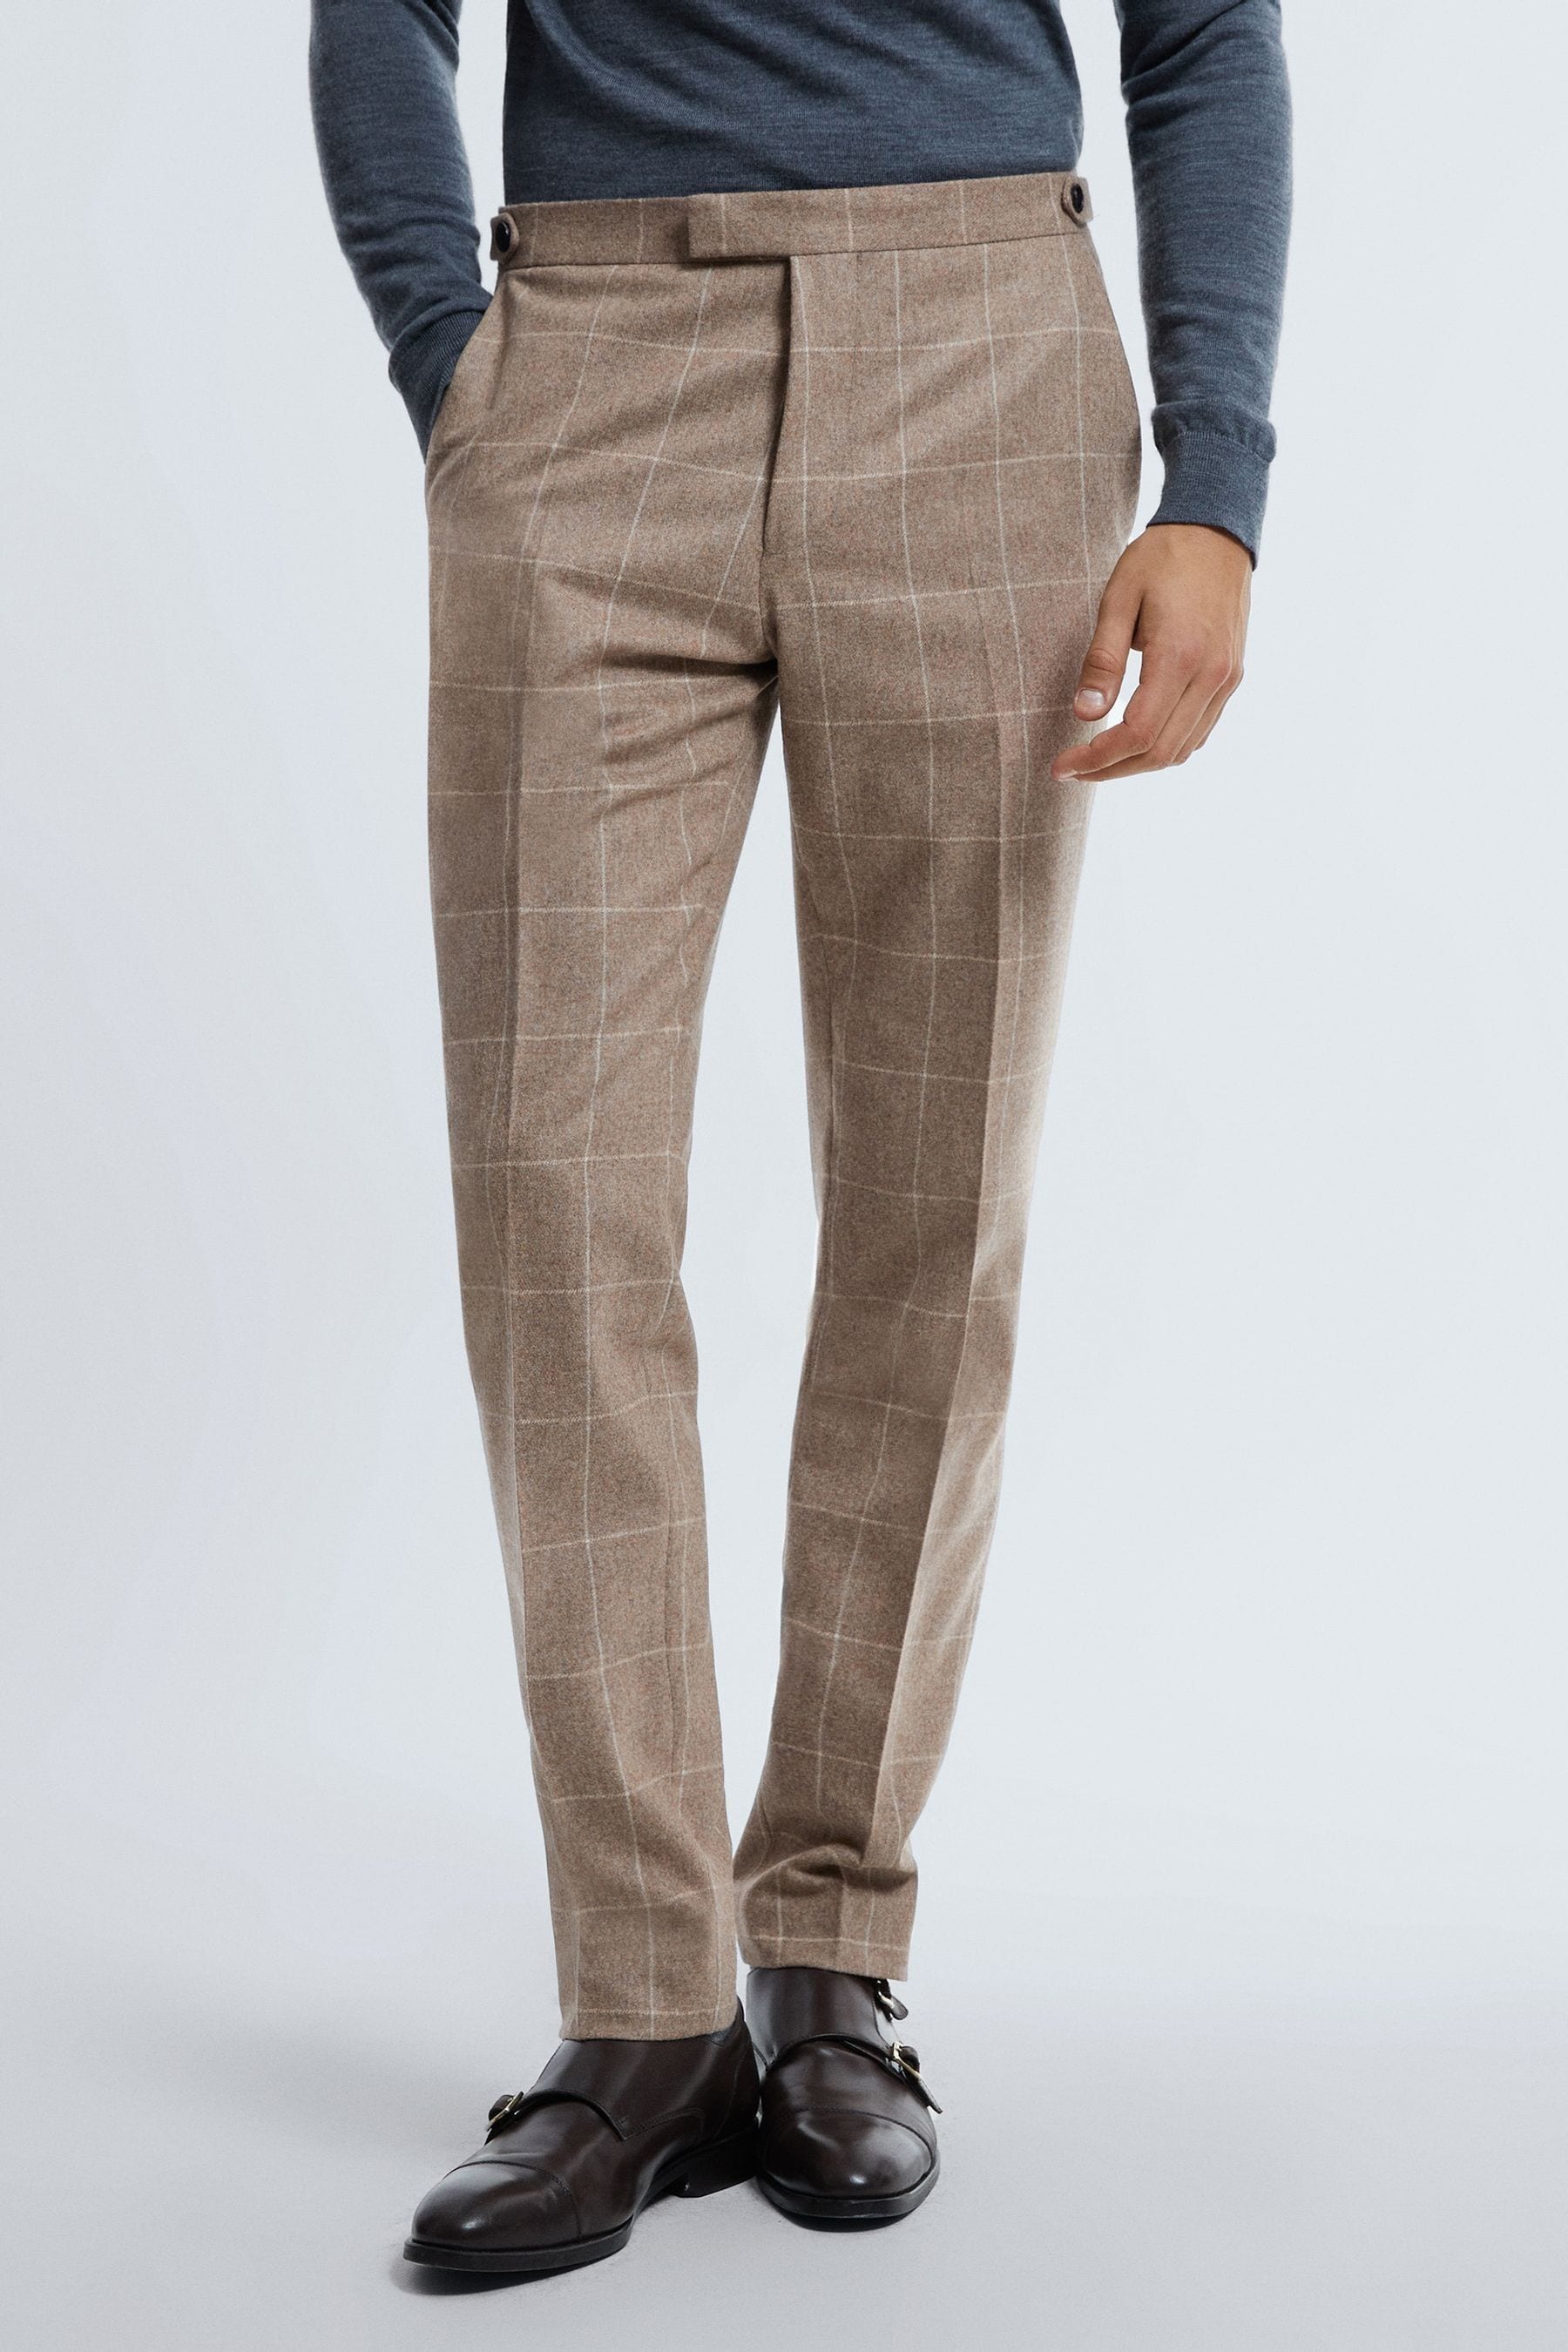 Atelier Italian Wool Cashmere Slim Fit Check Trousers In Oatmeal